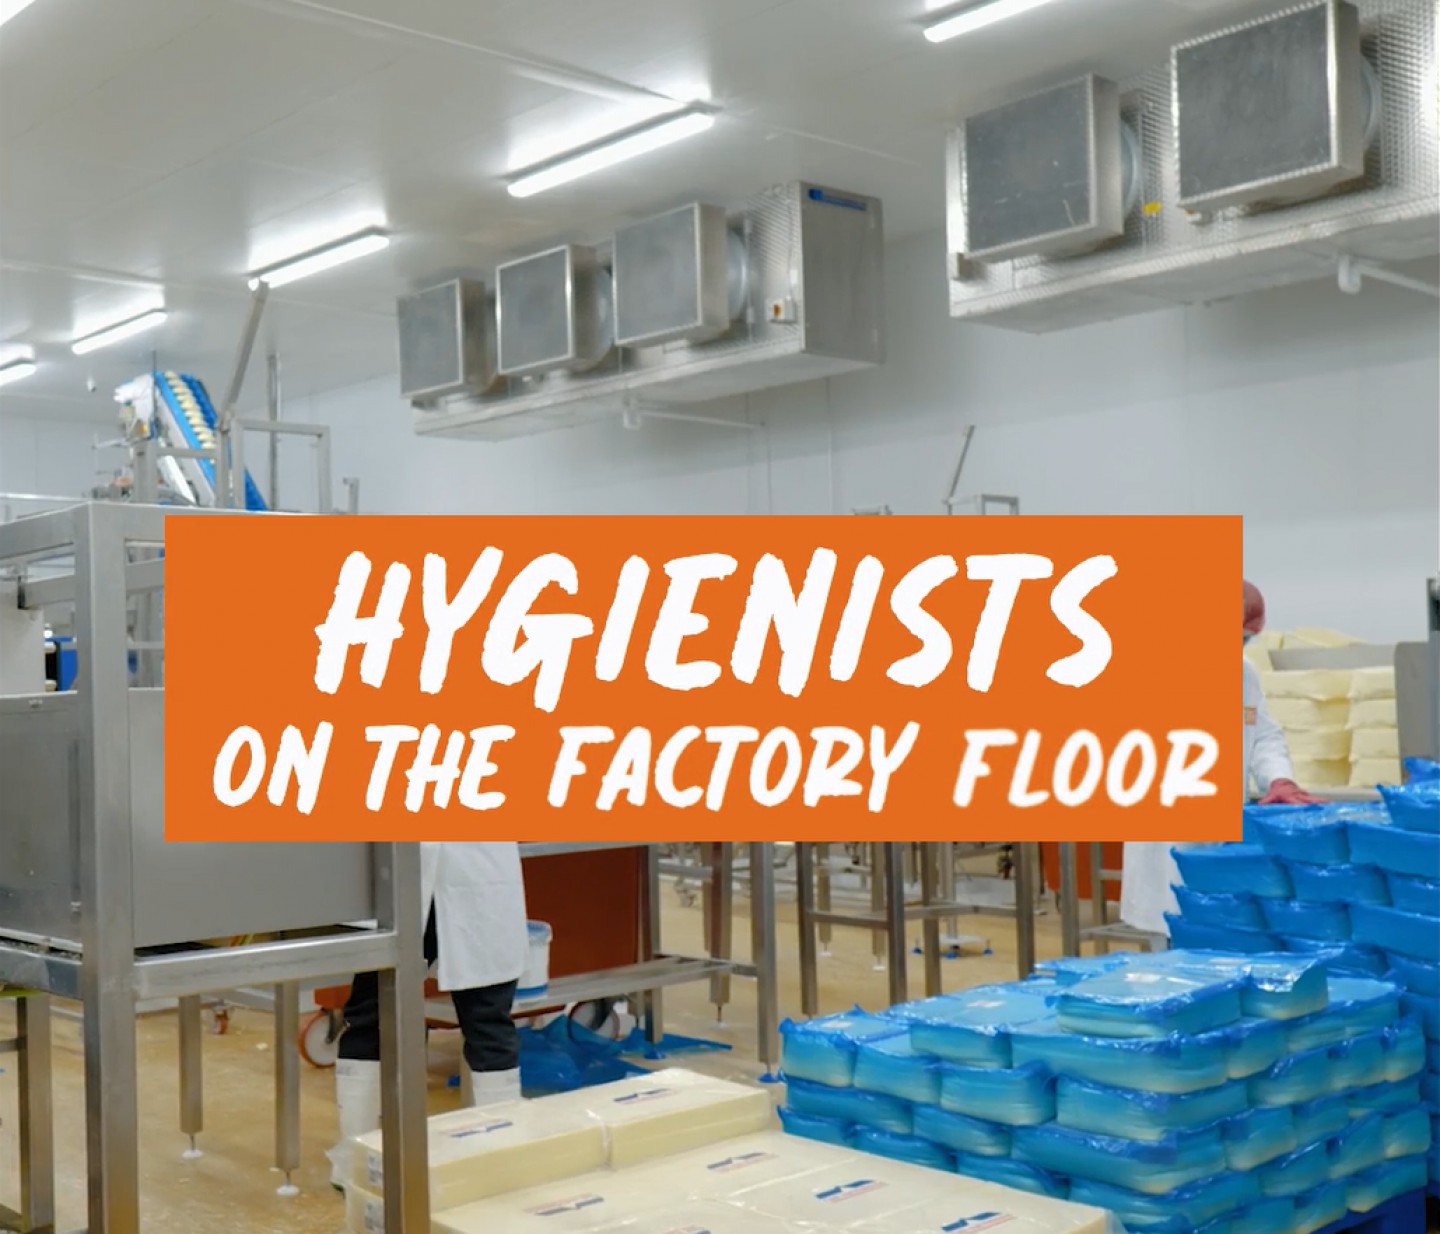 We have hygienists on our production floor